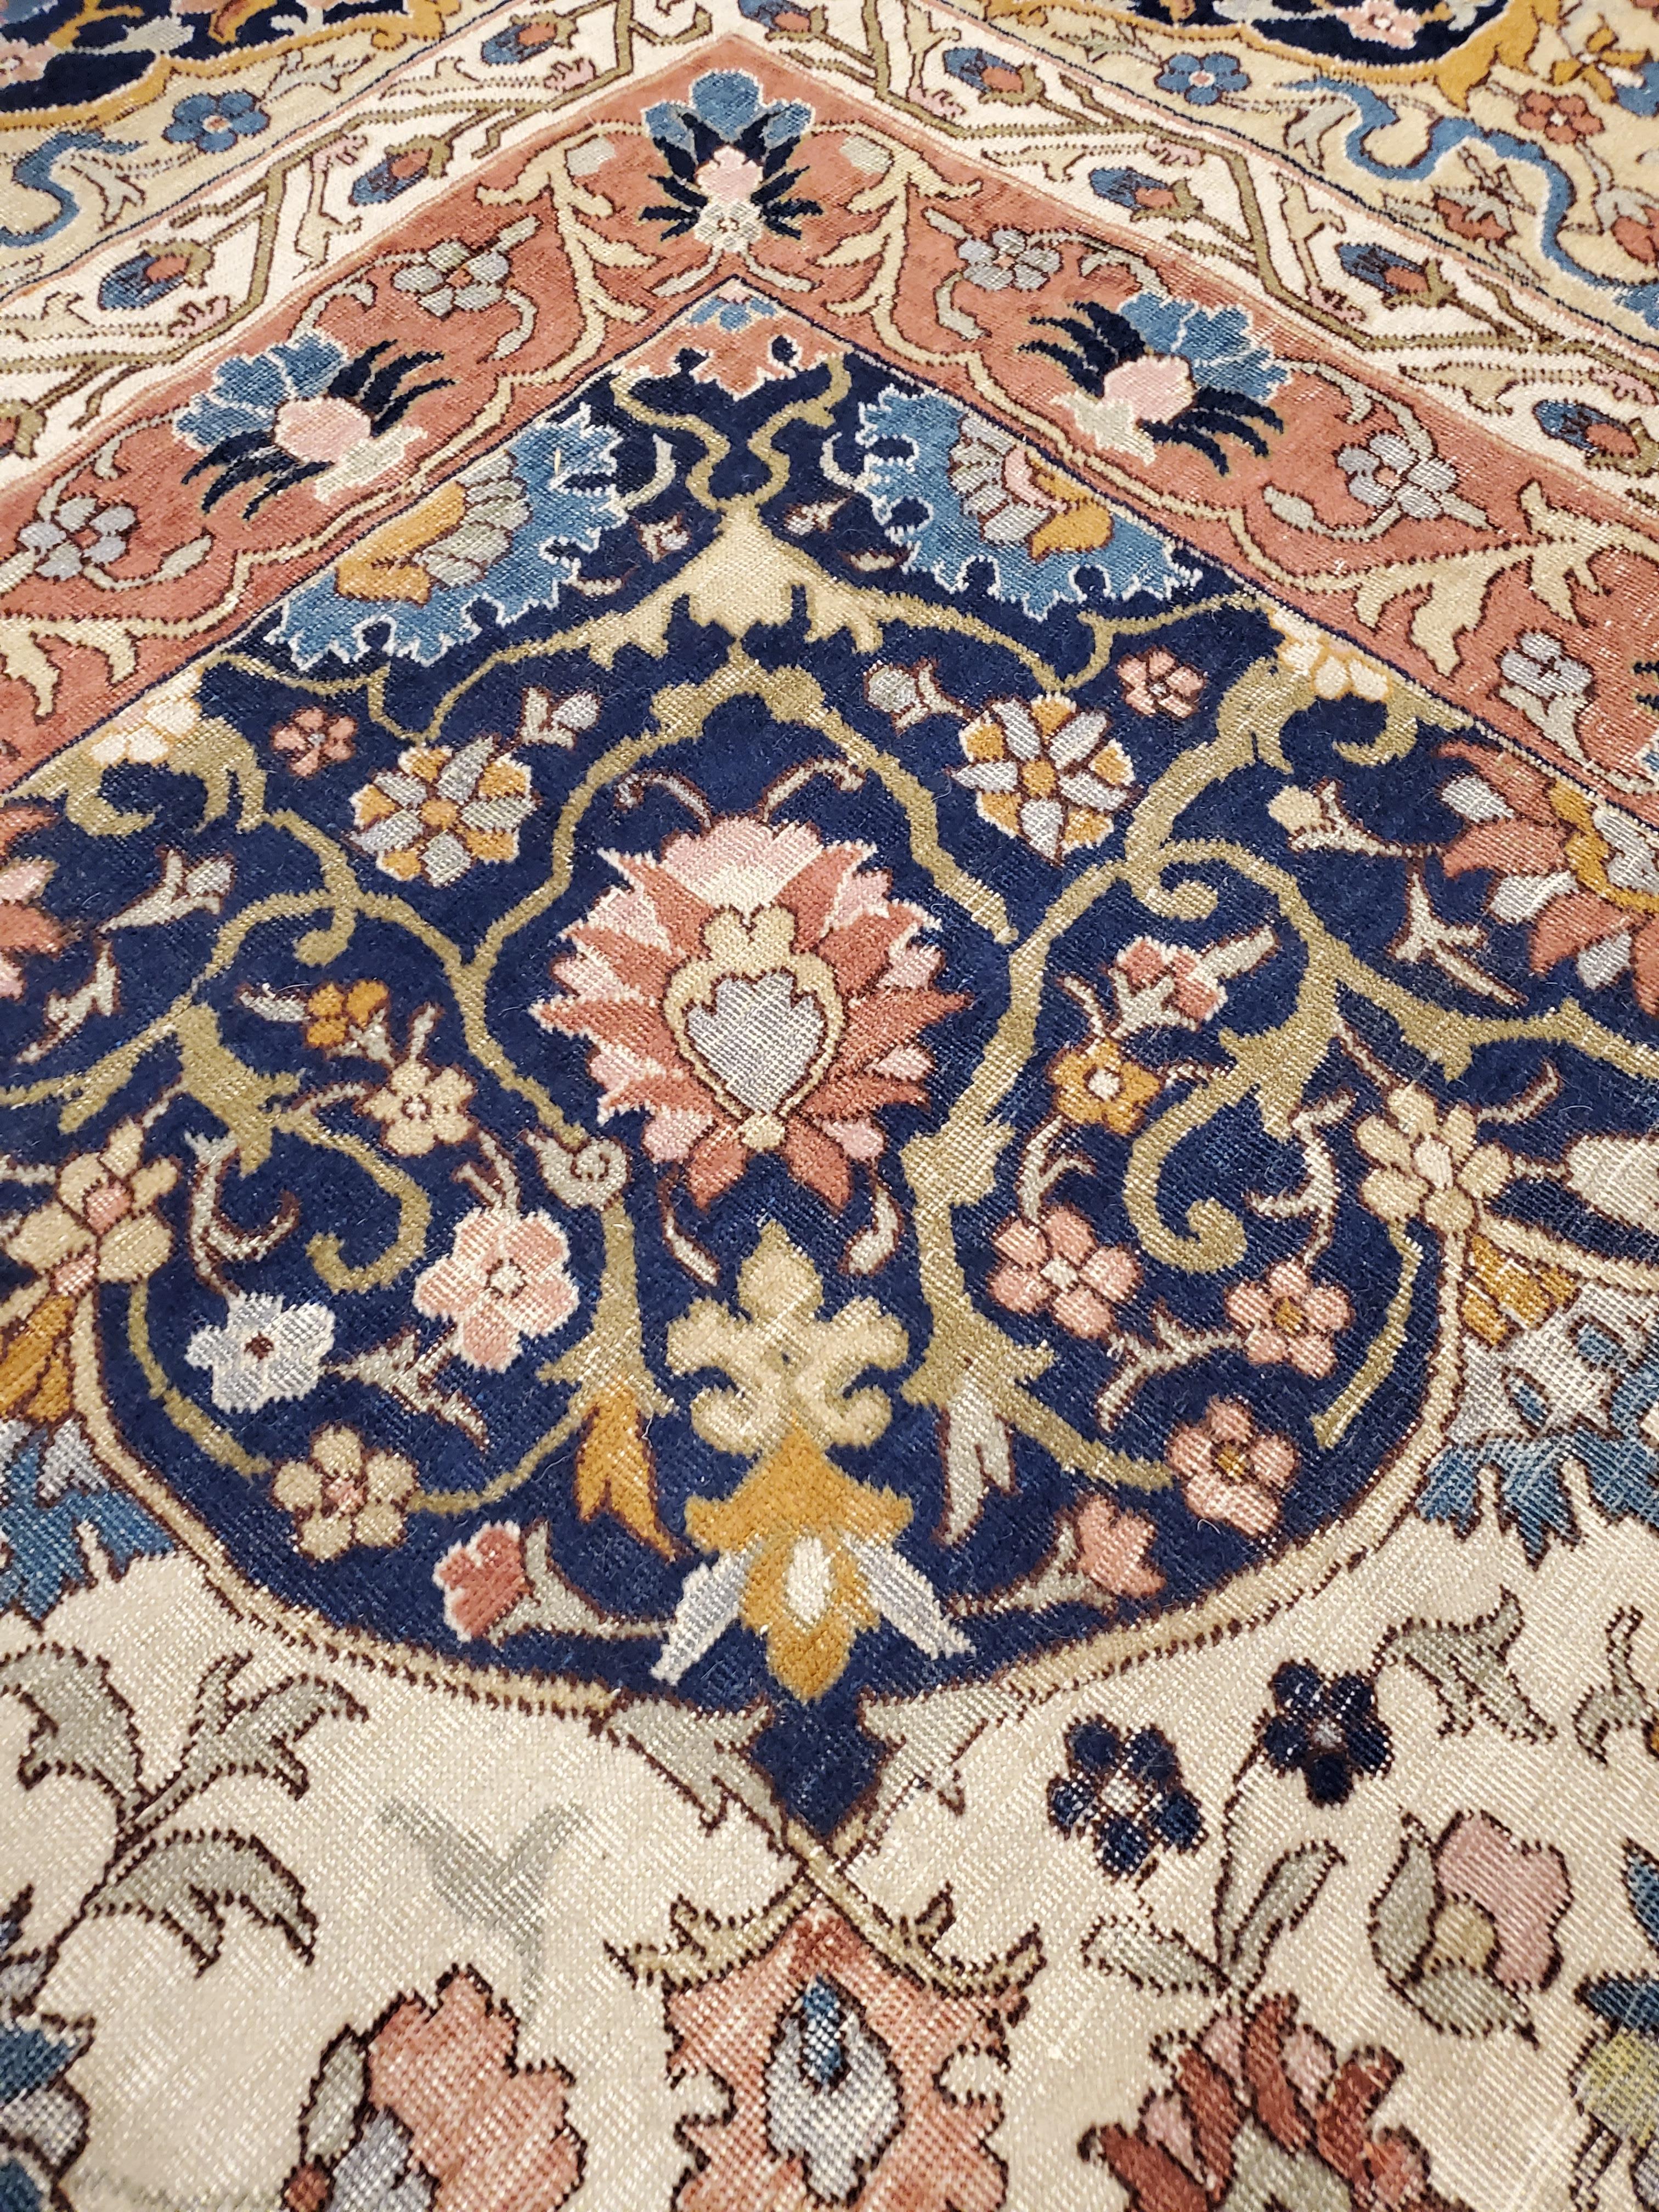 Sivas is a city in North Central Turkey, which is a major production site of Turkish rugs based on Persian designs. Often finely woven, Sivas rugs and carpets are highly appreciated as some of the best-made and decorative rugs from Turkey. They are